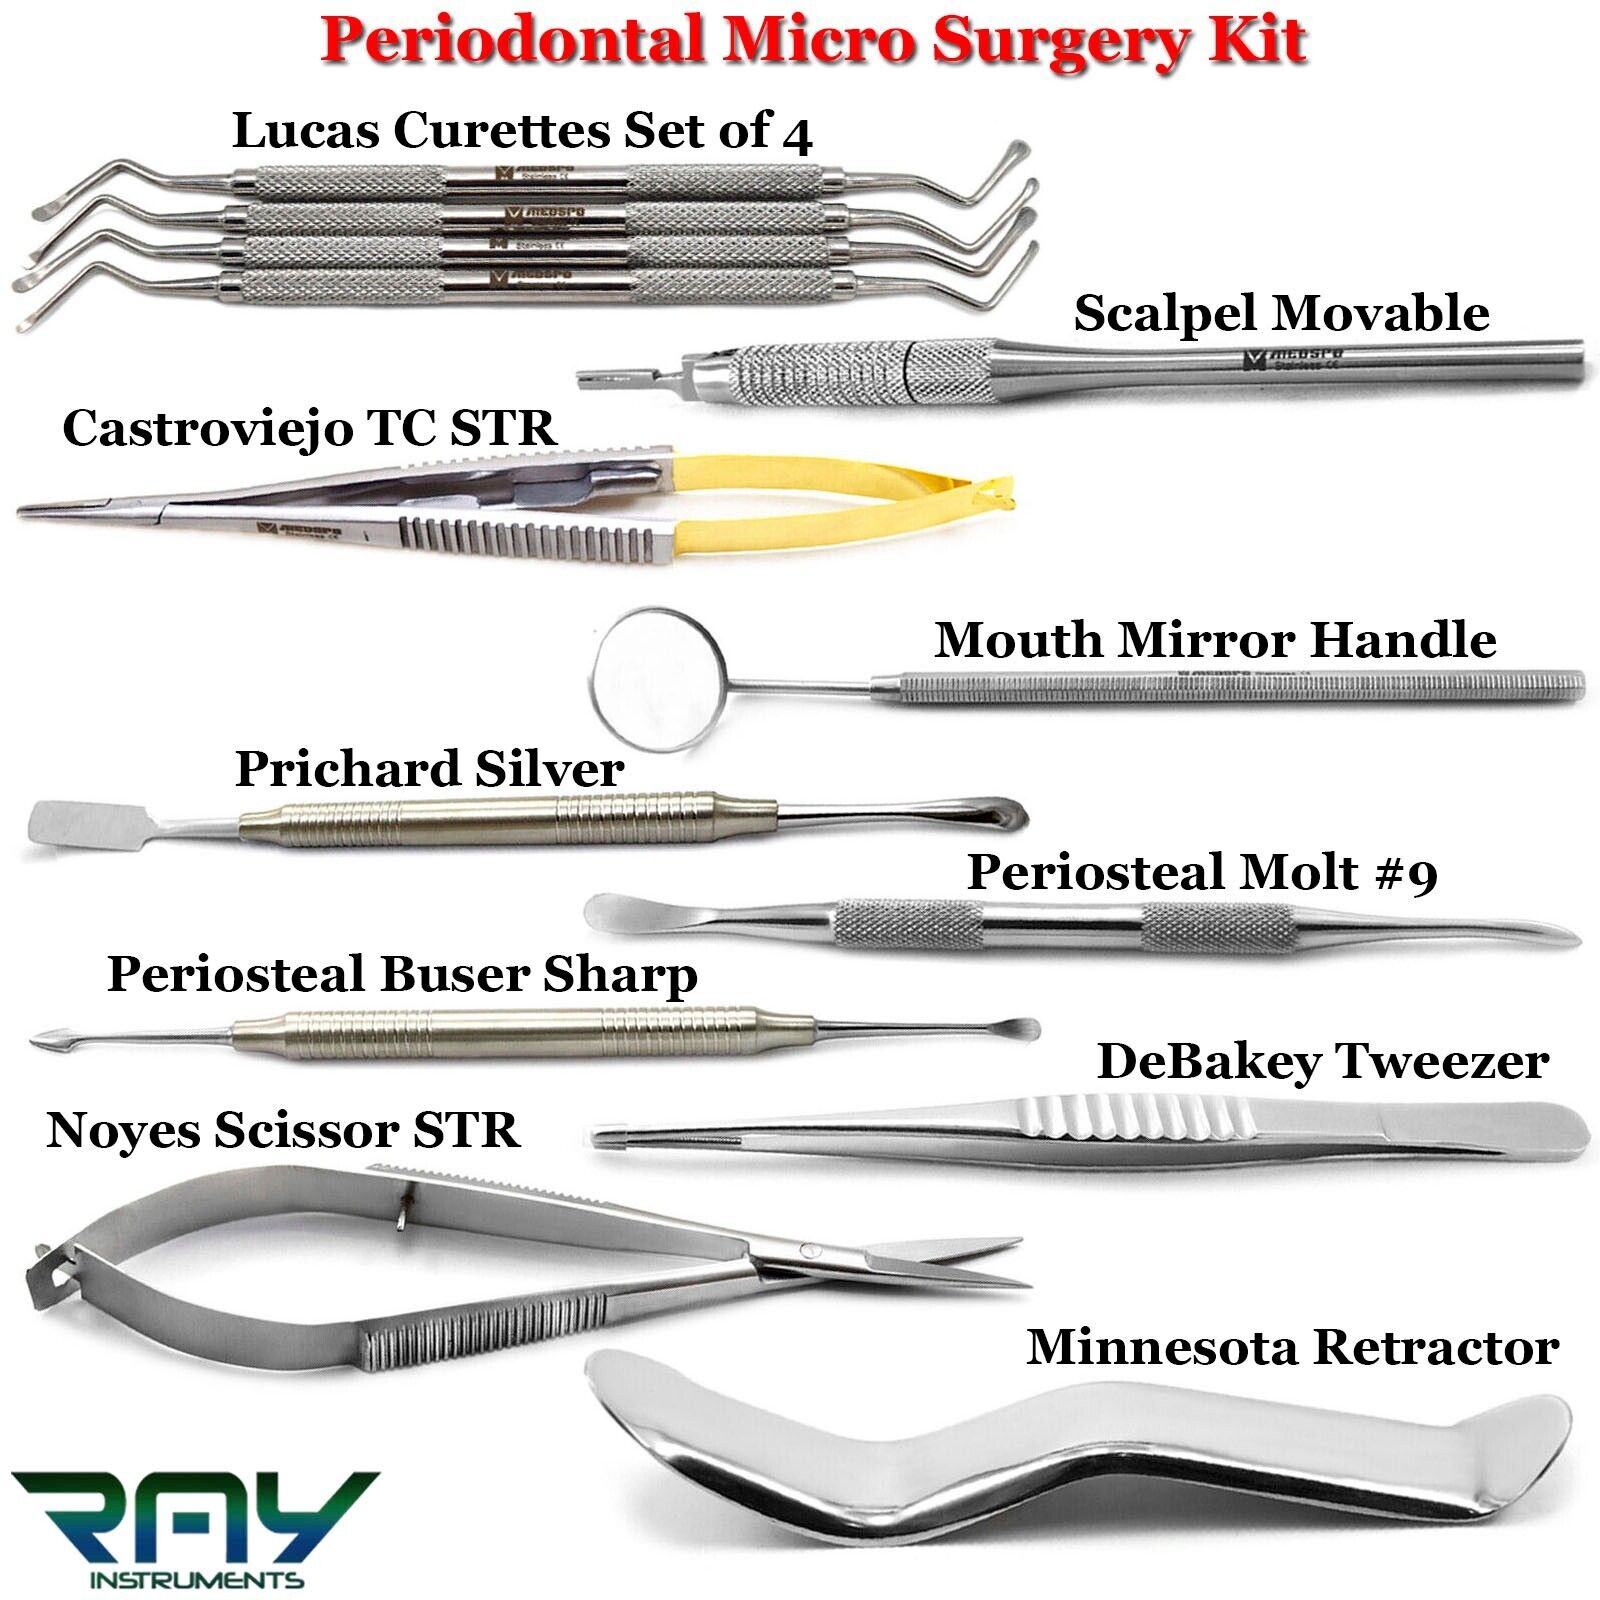 Dental Periodontal Lucas Curettes Periosteal Elevators Micro Oral Surgery Kit